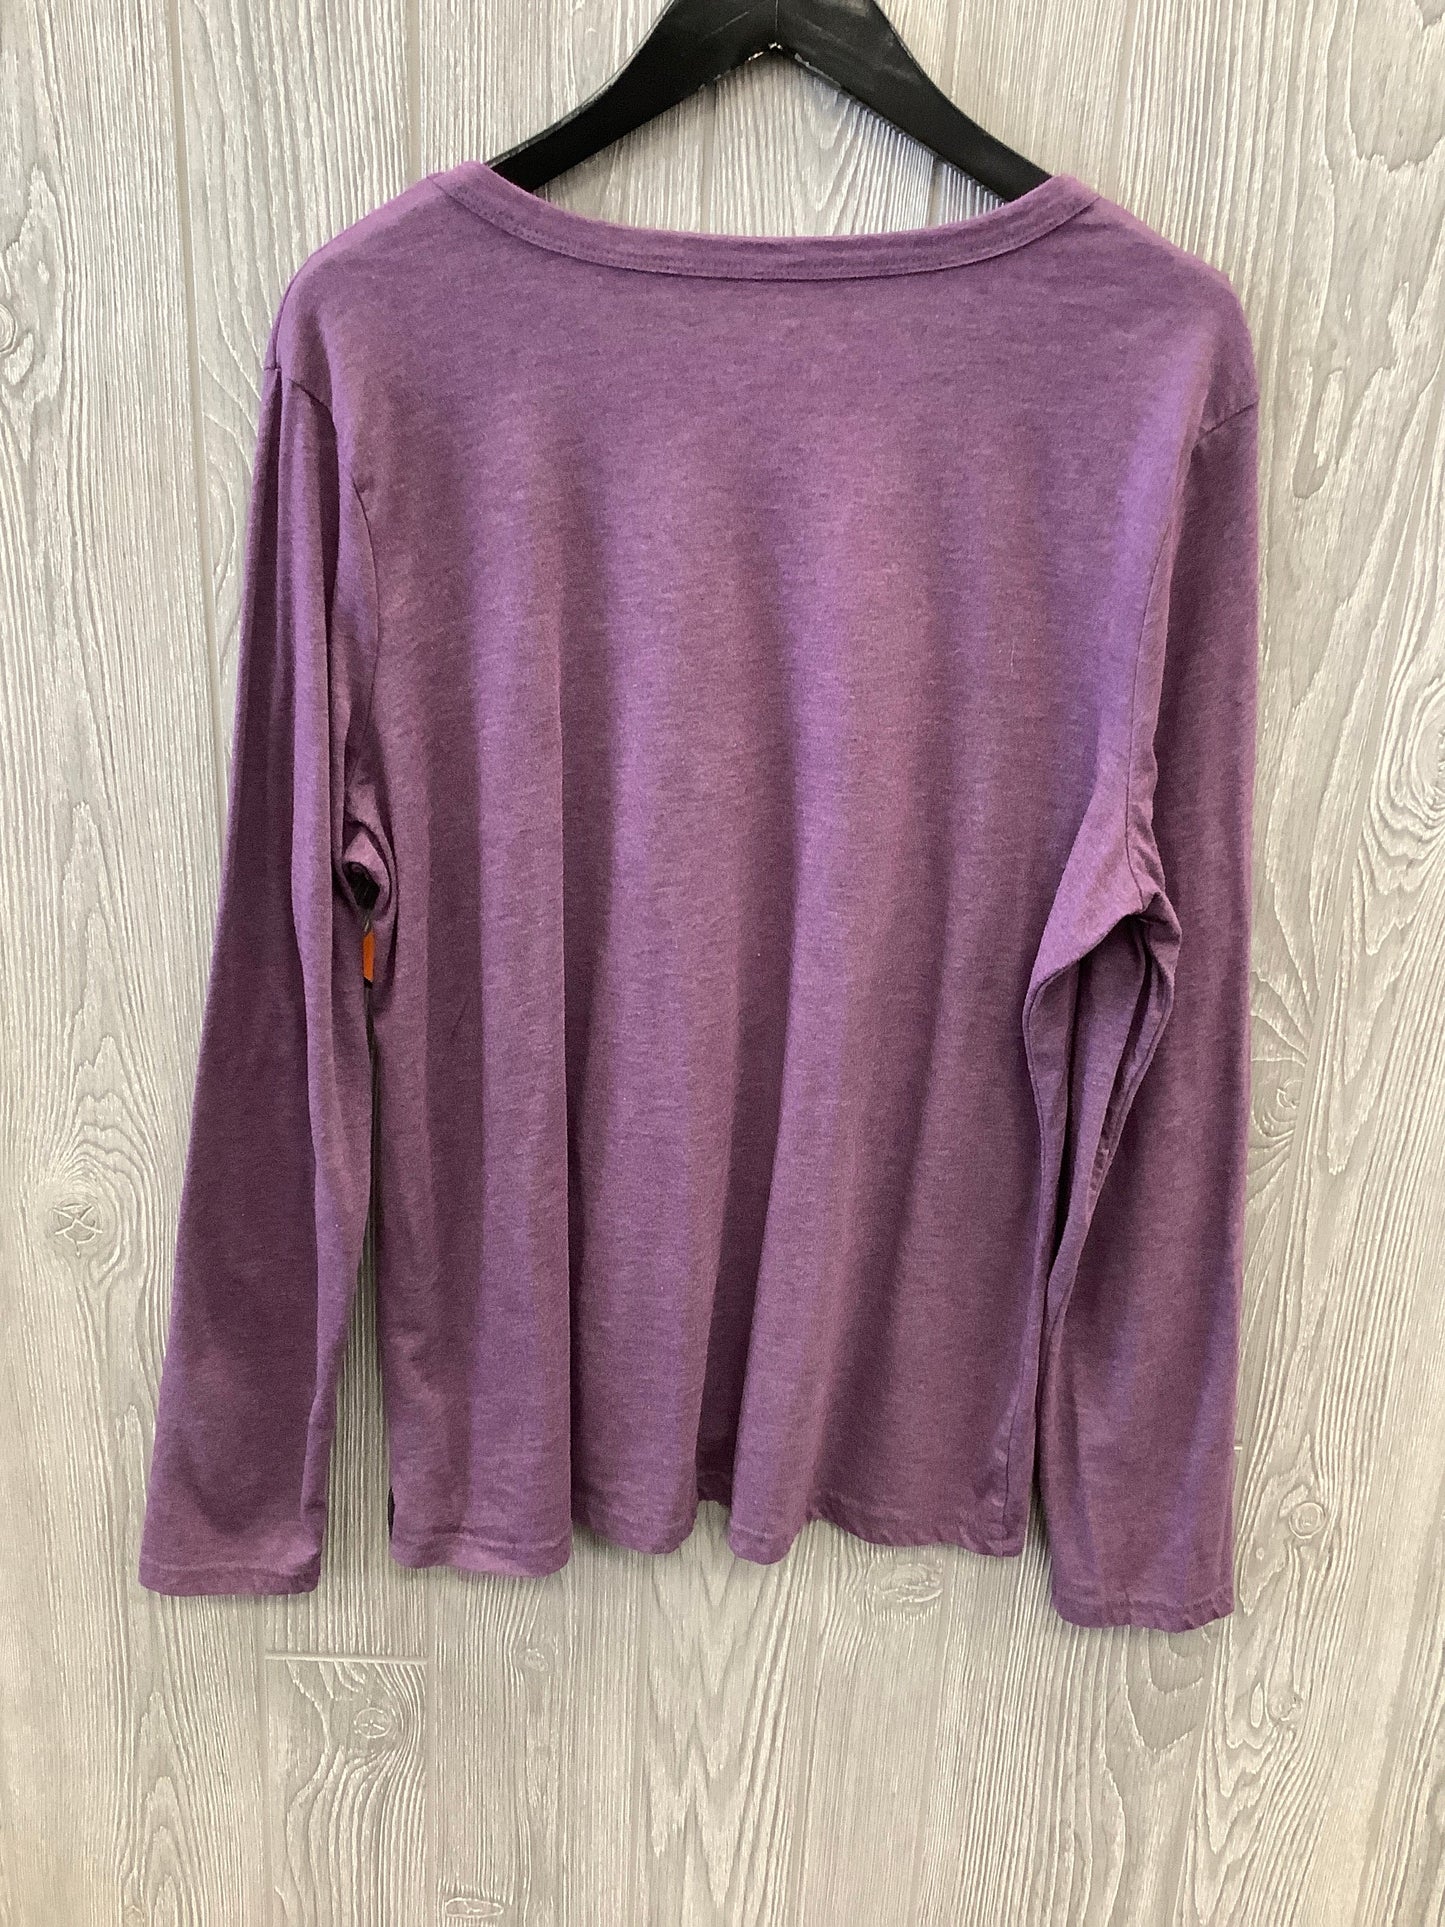 Top Long Sleeve Basic By Time And Tru  Size: Xxl